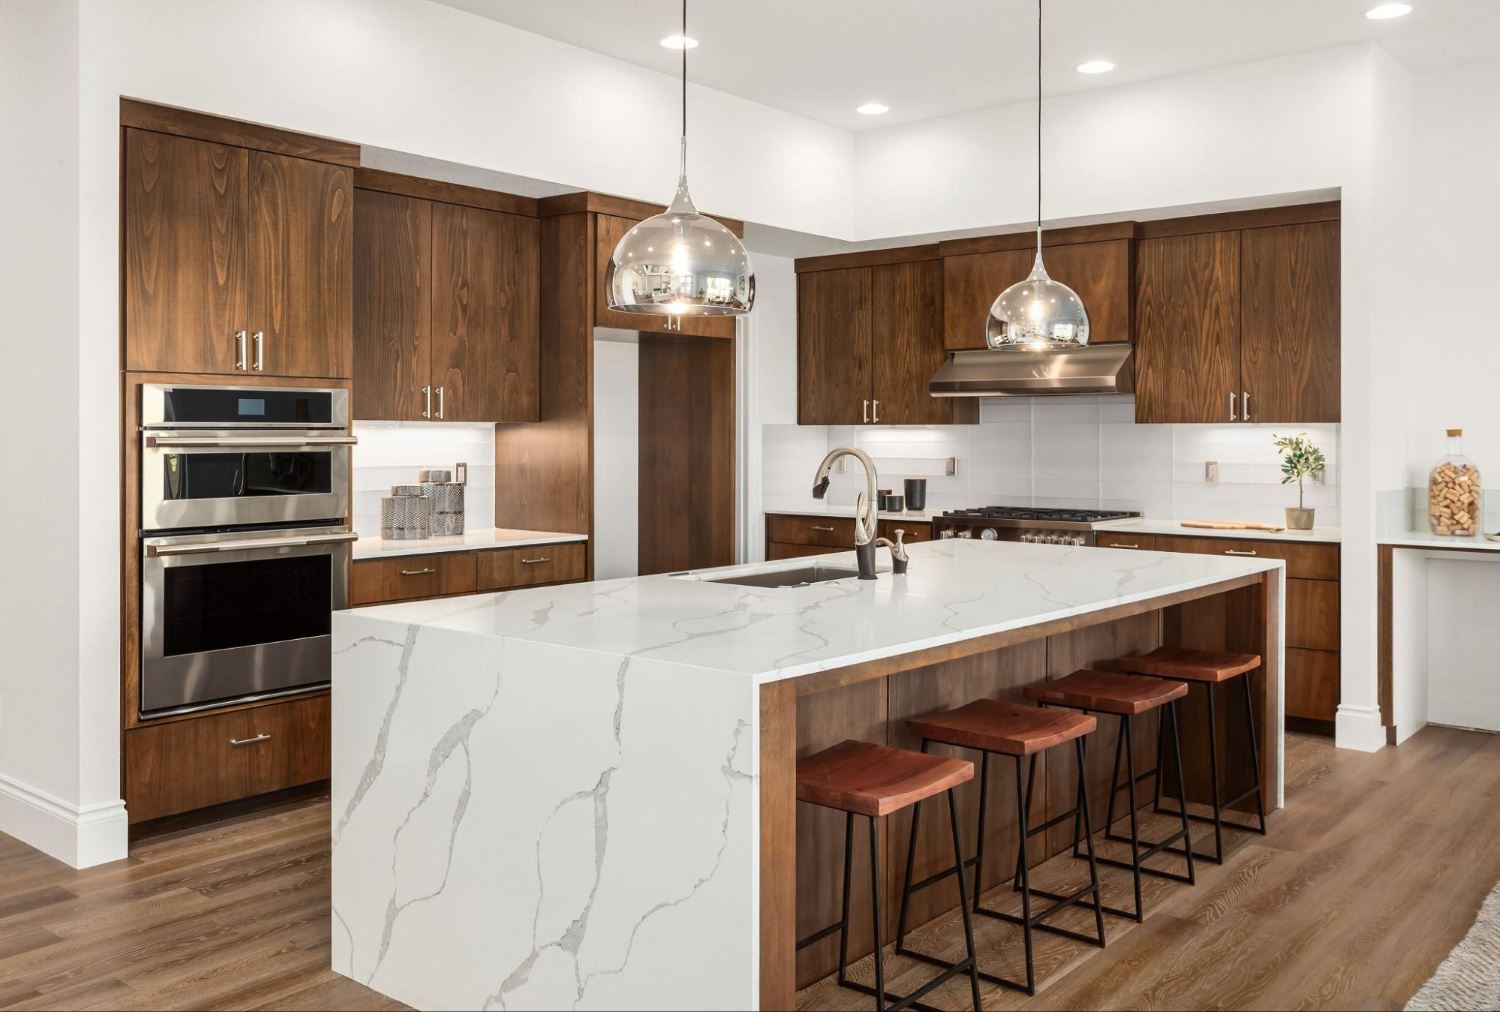 Big Island with Marble Countertop and Seating in a Modern Kitchen